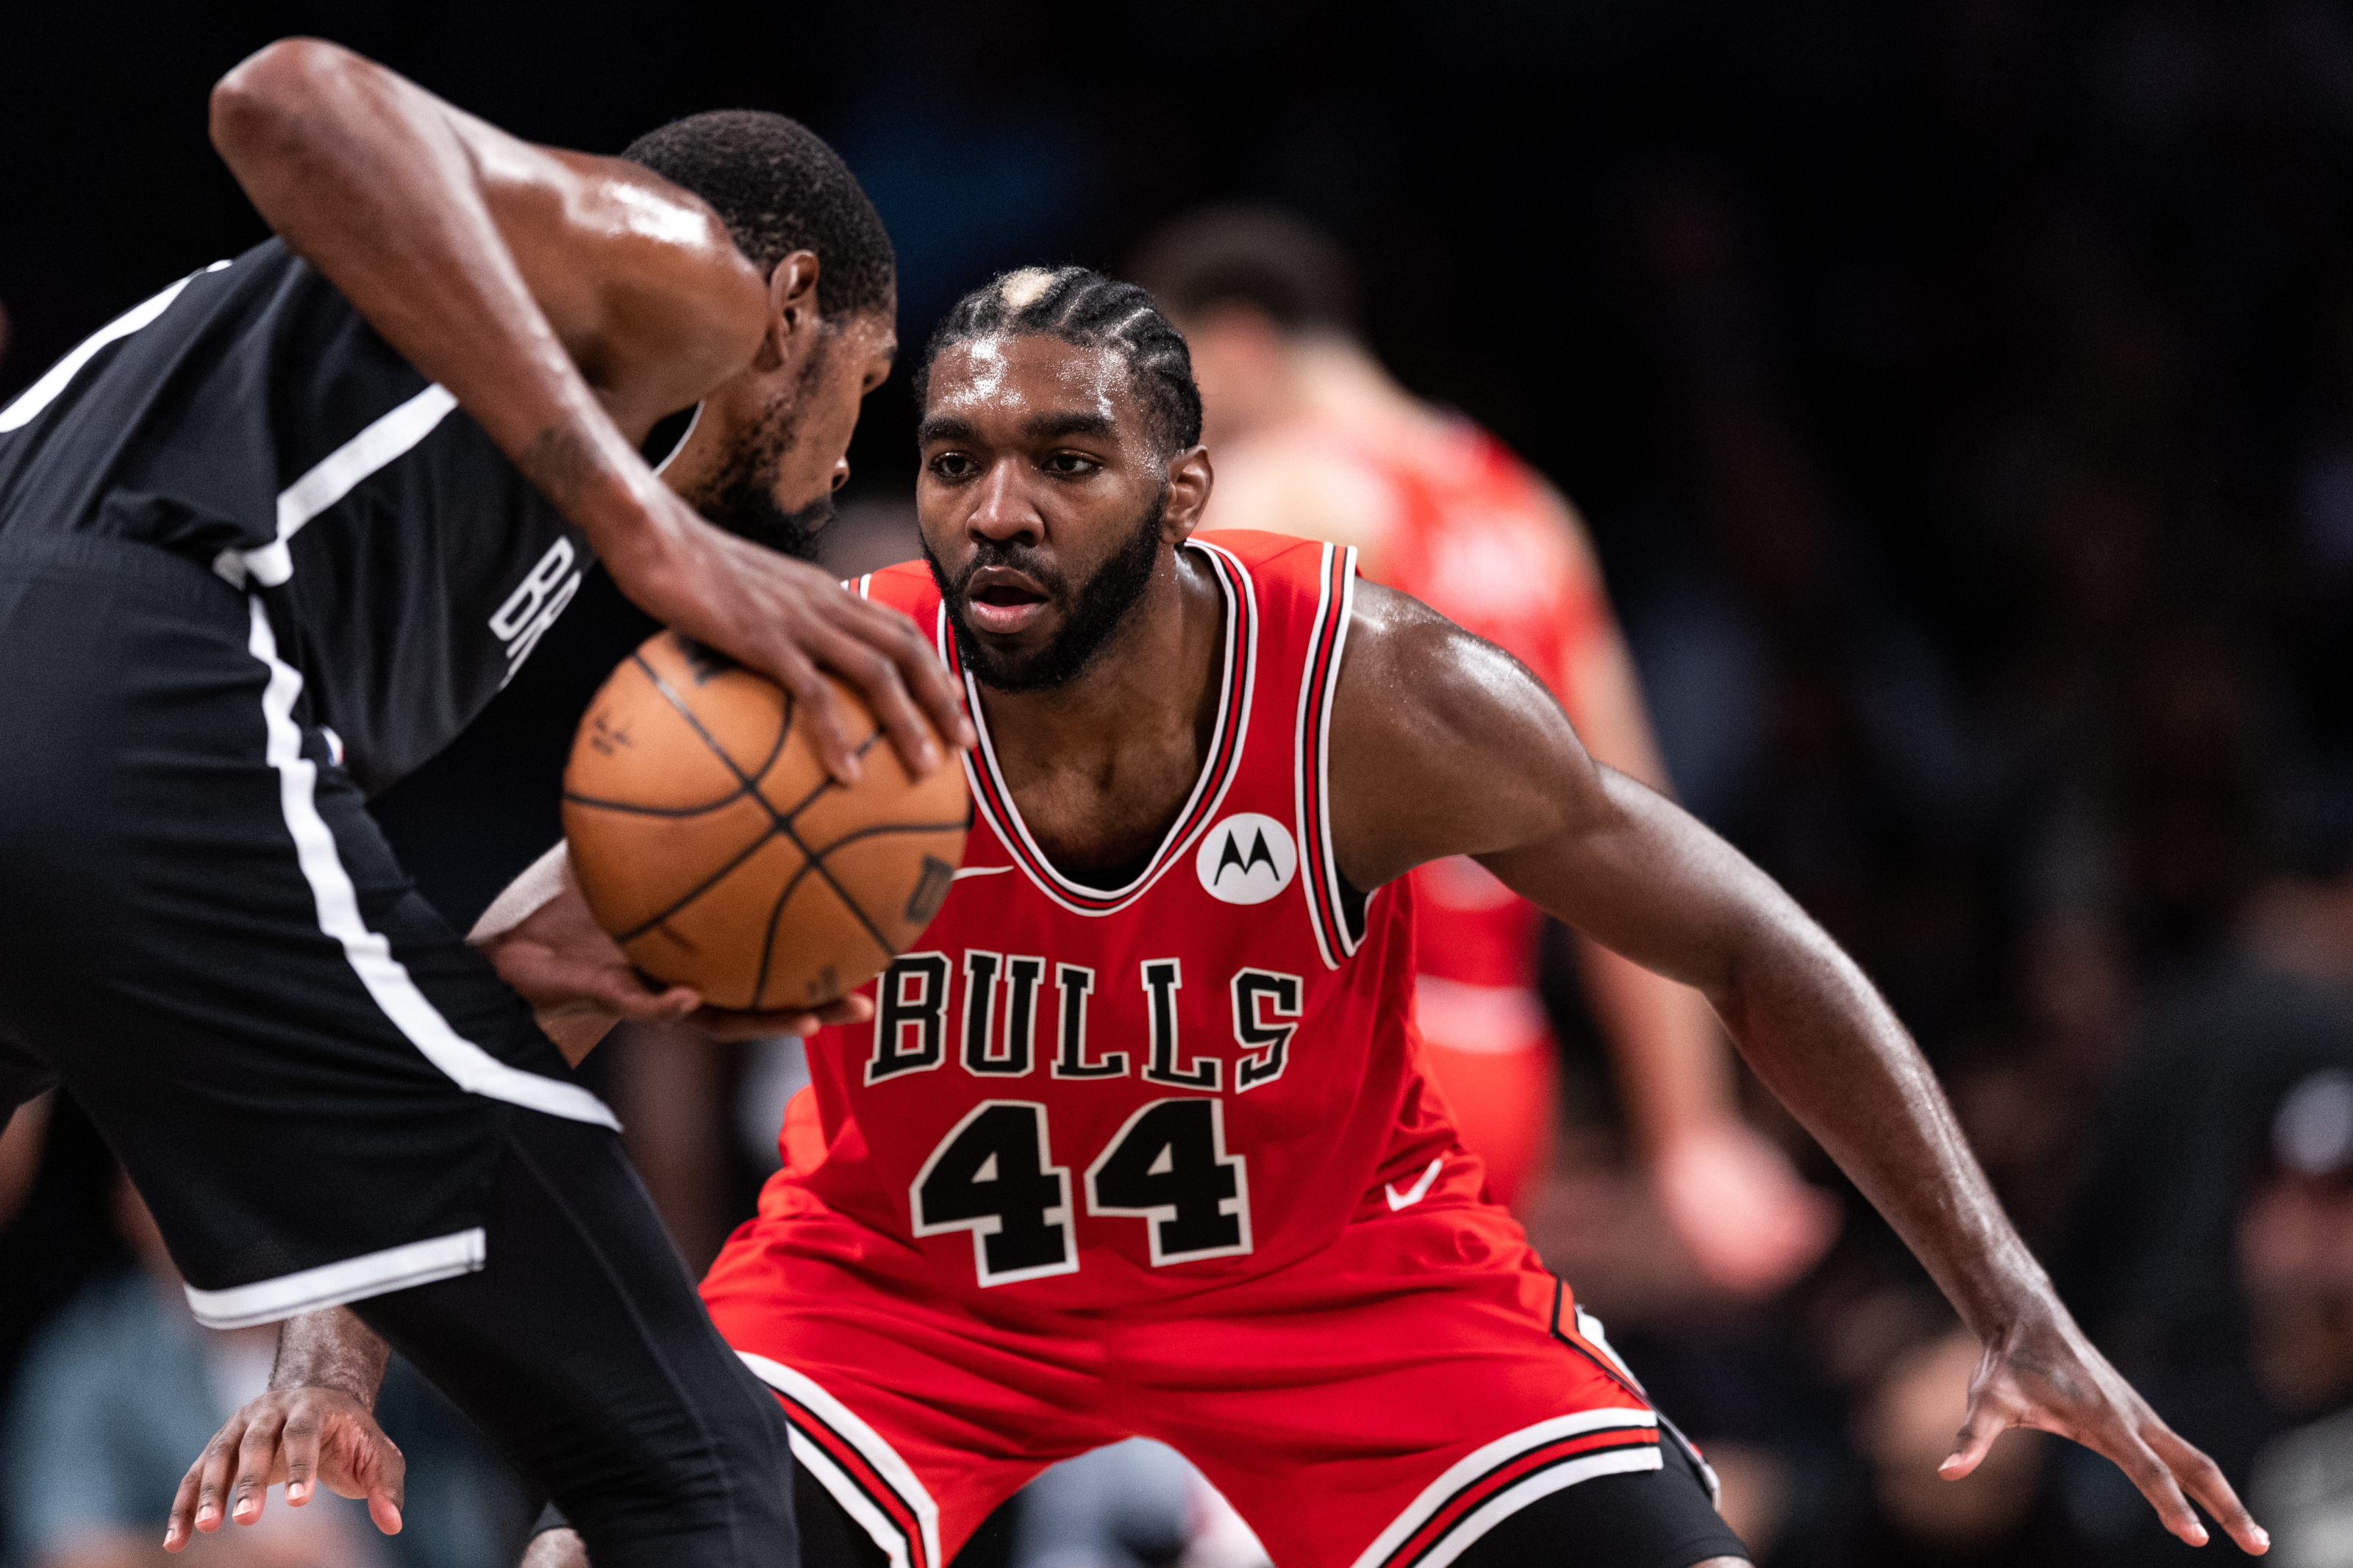 The Chicago Bulls need a star, and Patrick Williams is finally developing